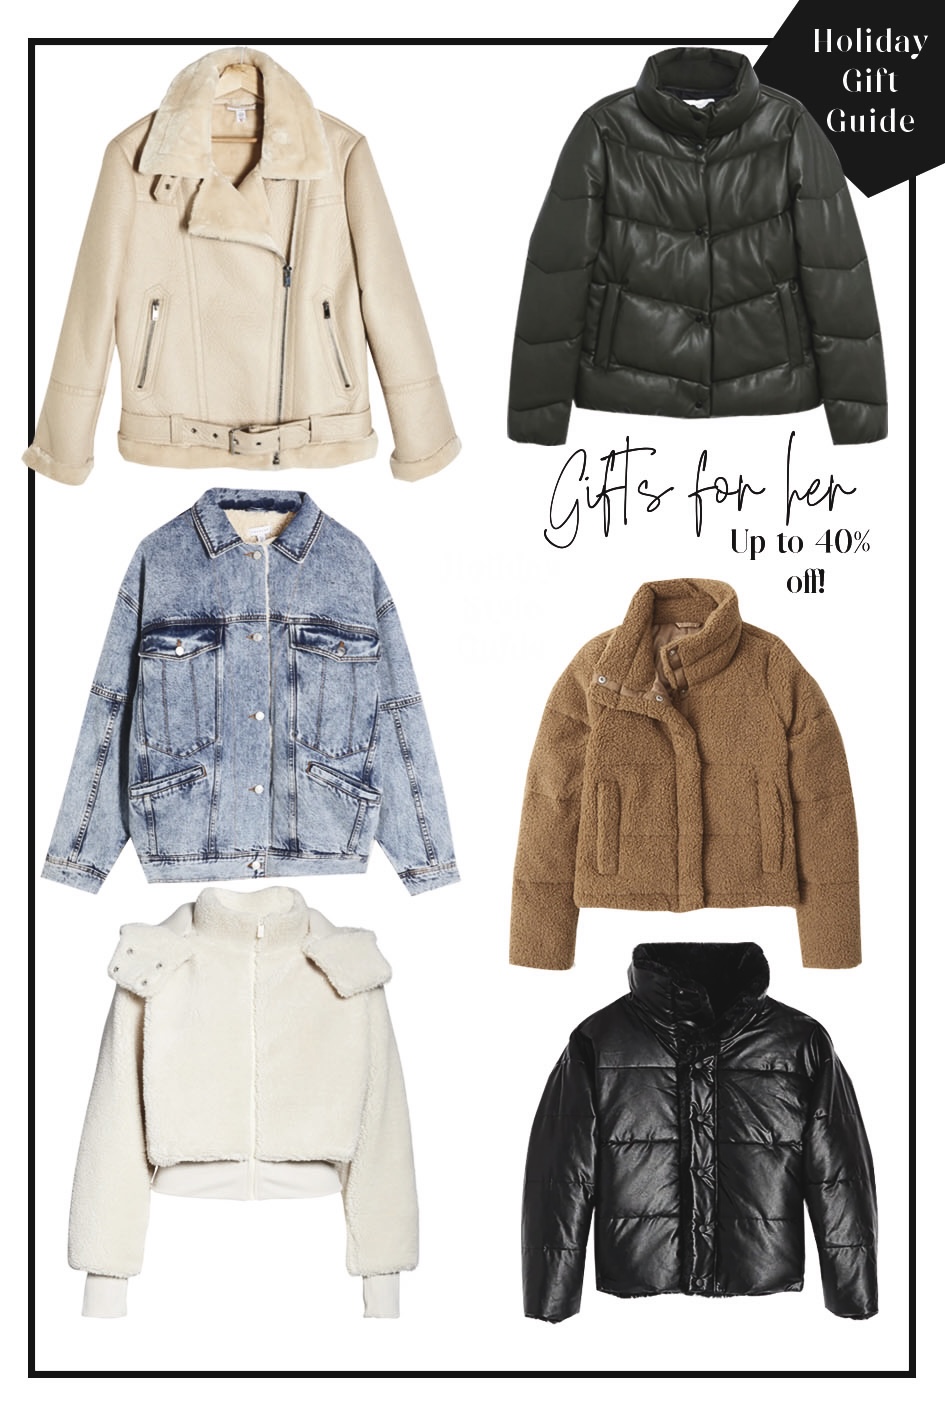 HOLIDAY GIFT FOR HER -JACKETS AND COATS